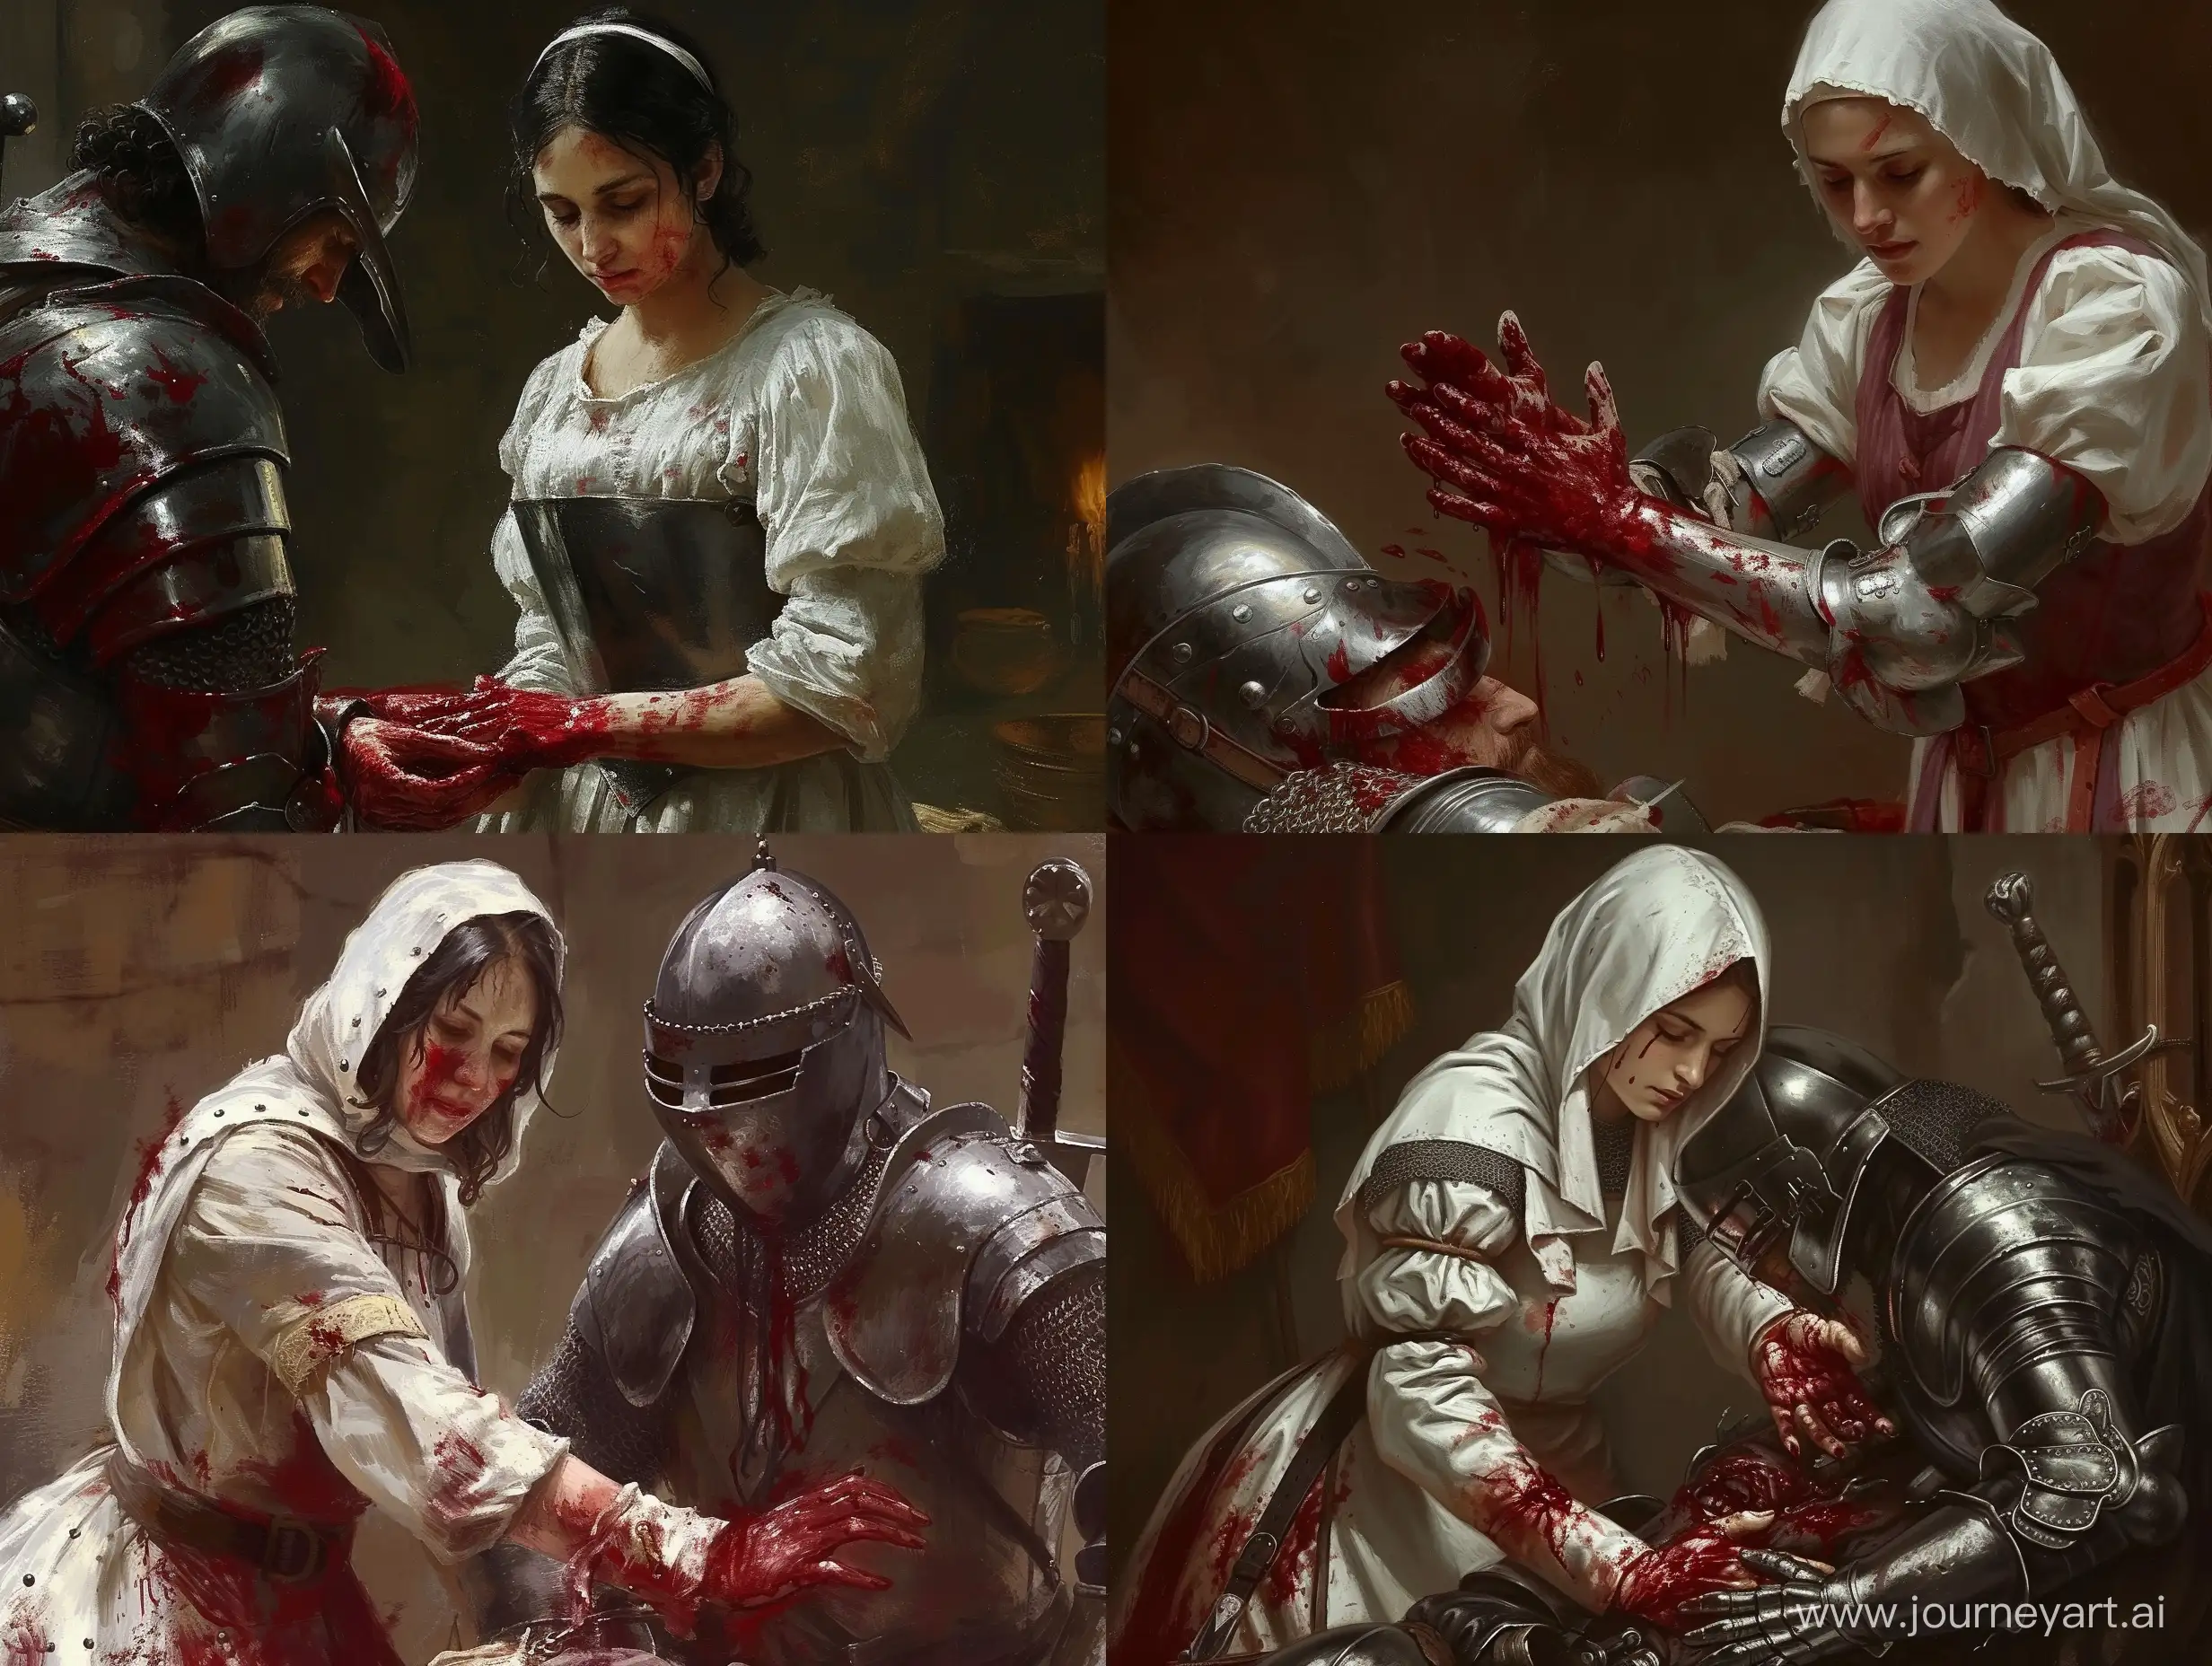 Medieval nurse helps wounded knight, her hands are in blood